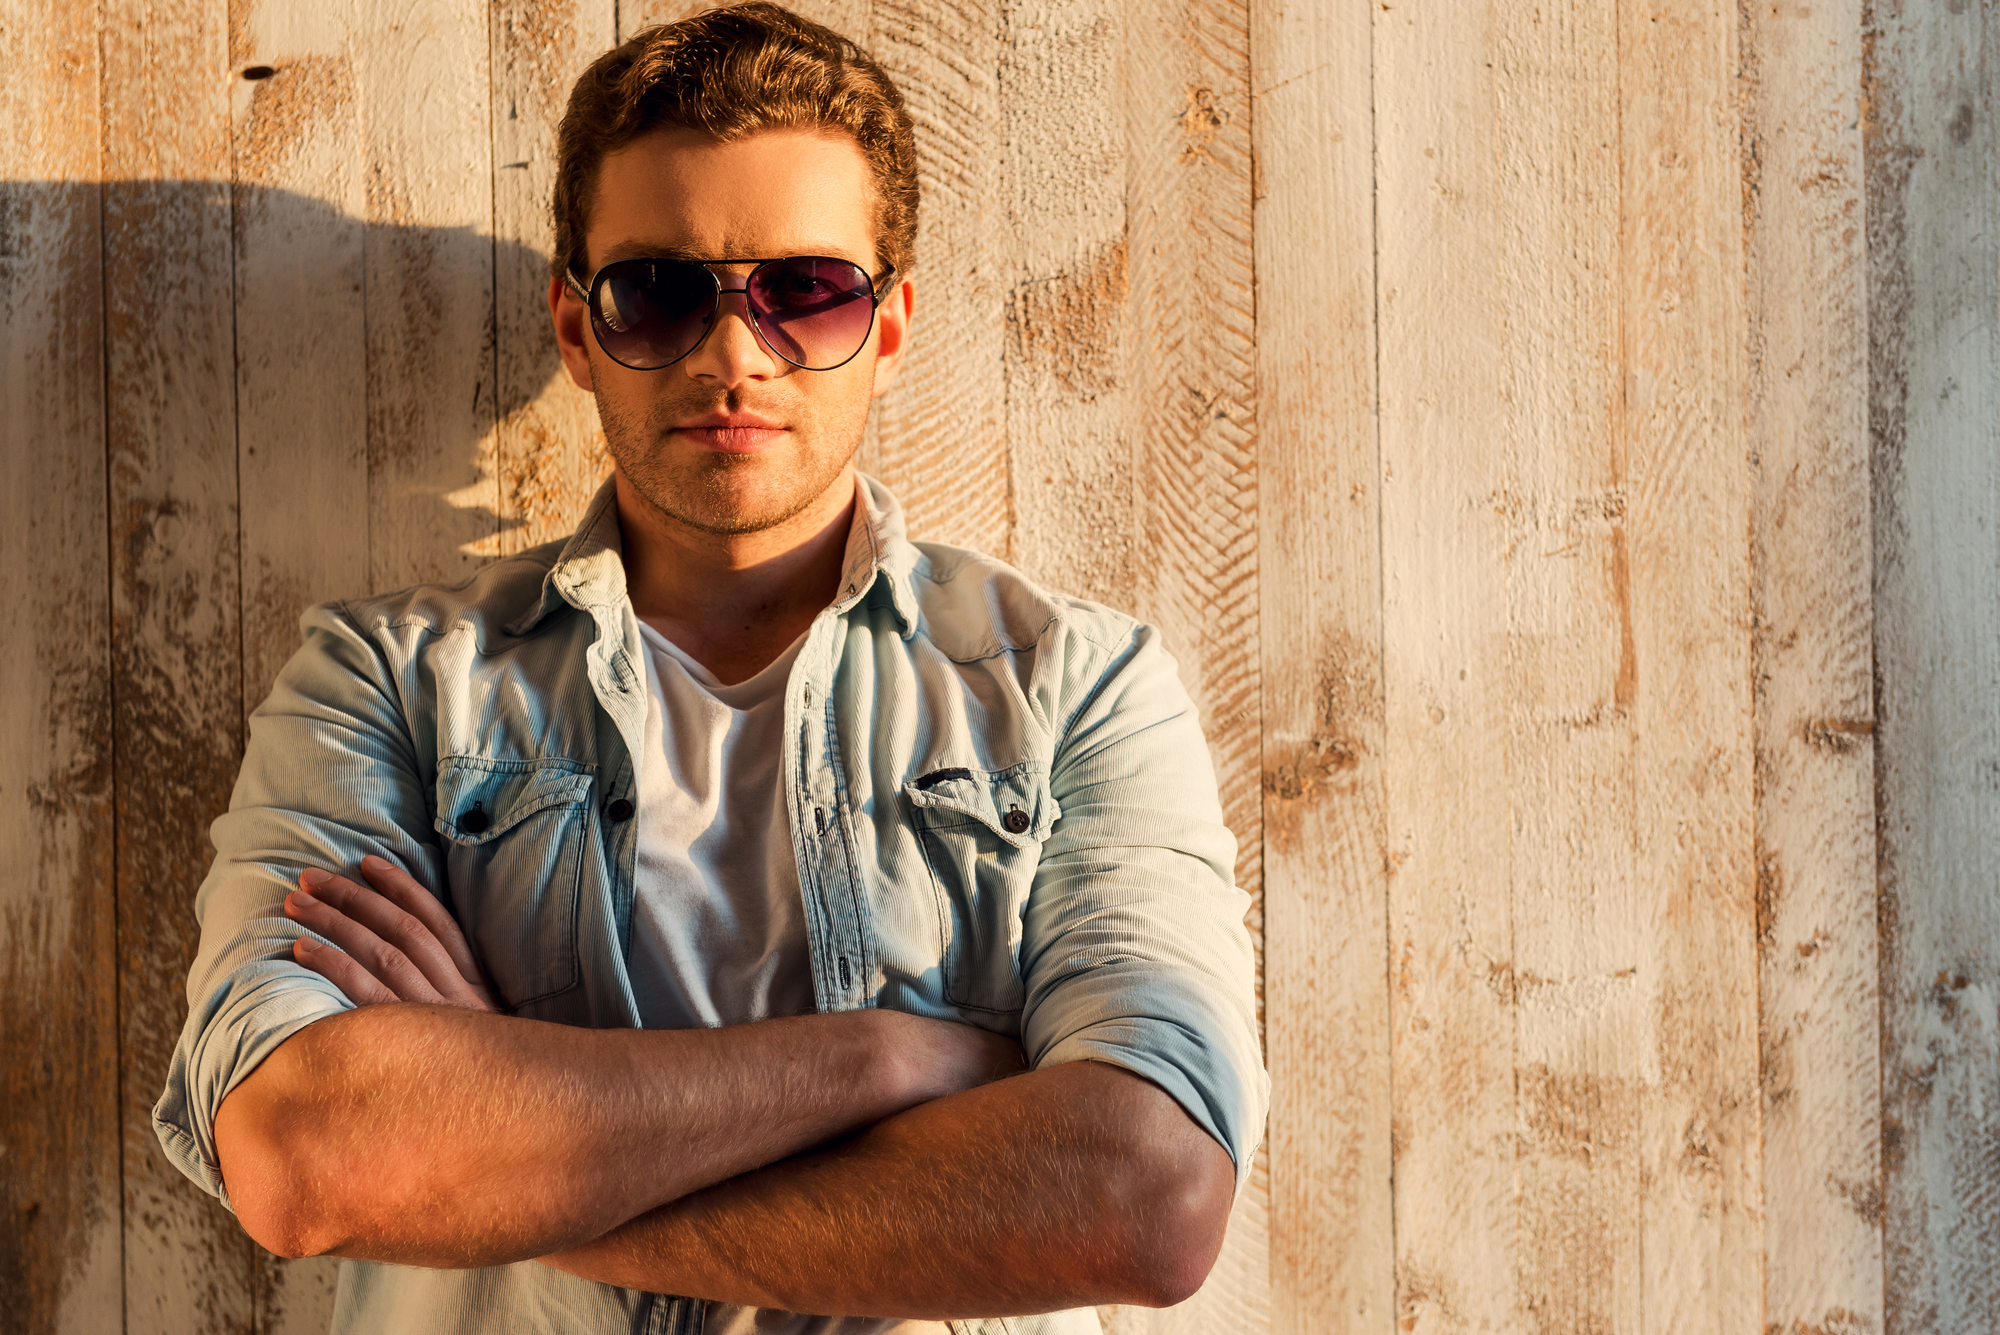 A man with short hair wearing dark aviator sunglasses and a light denim shirt stands with his arms crossed against a textured wooden wall, illuminated by warm sunlight from the left.